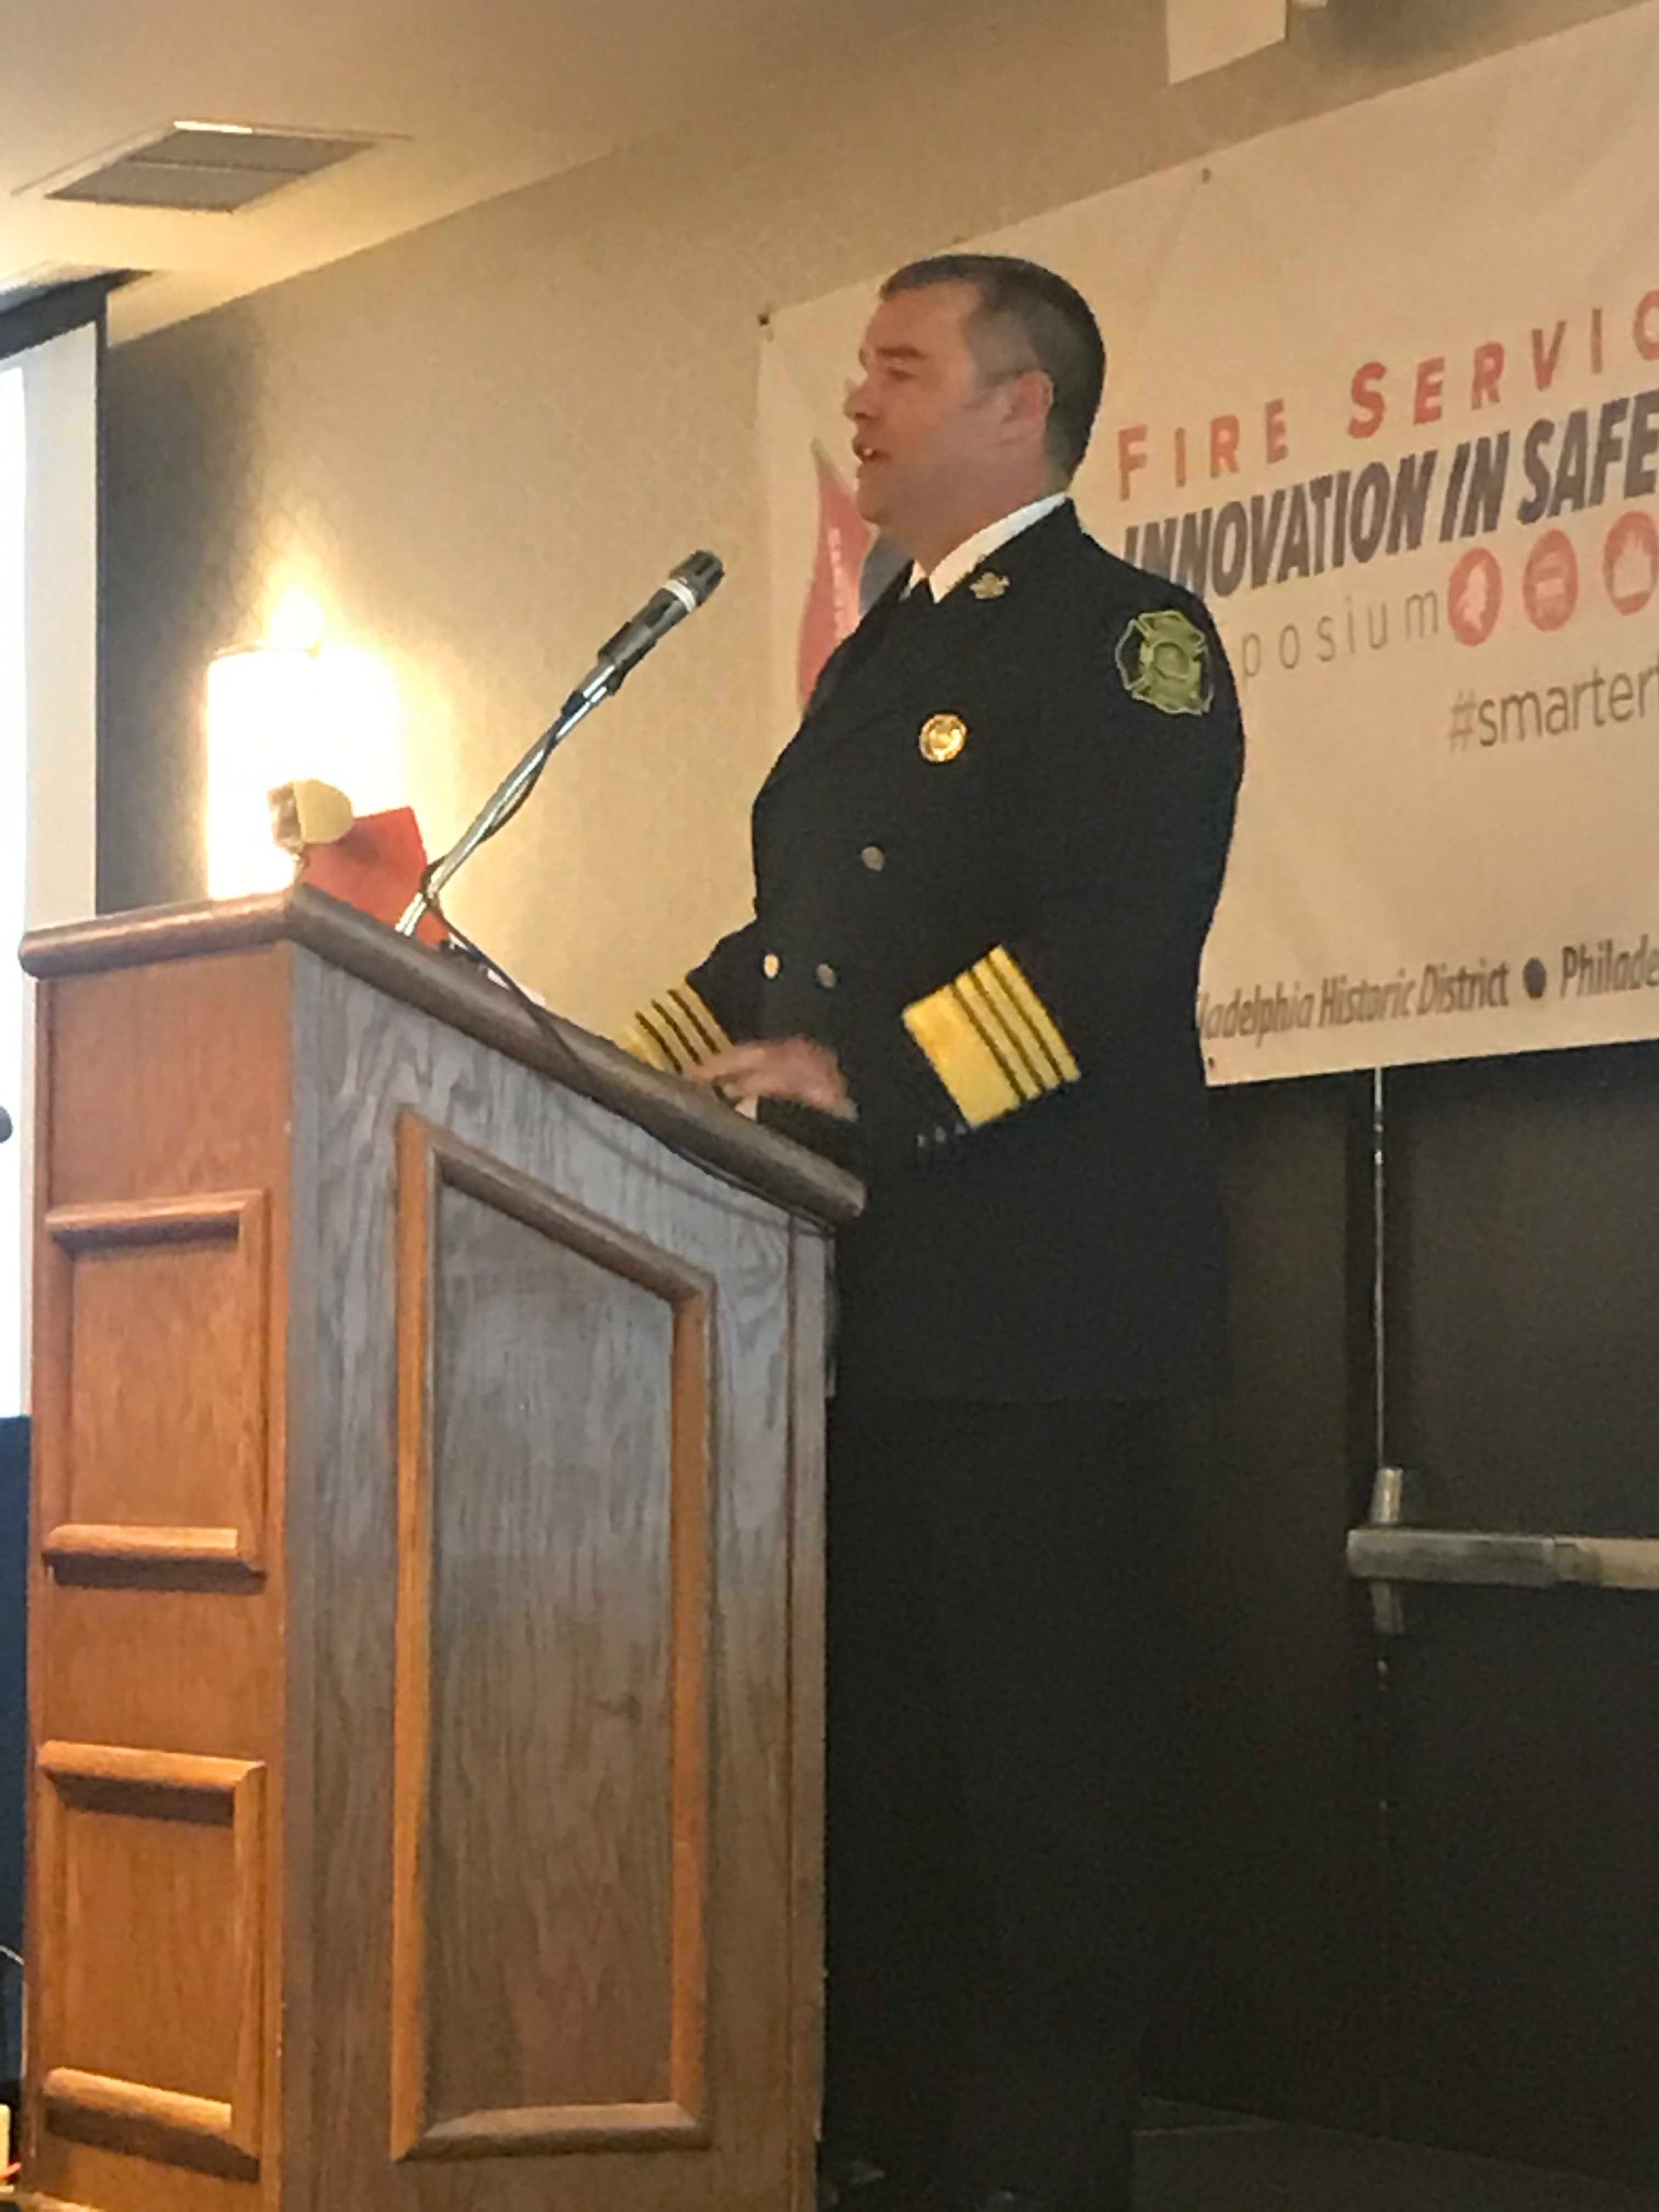 RaCERS Director Speaks at National Fallen Firefighters Foundation Event on Technology, Smart Cities